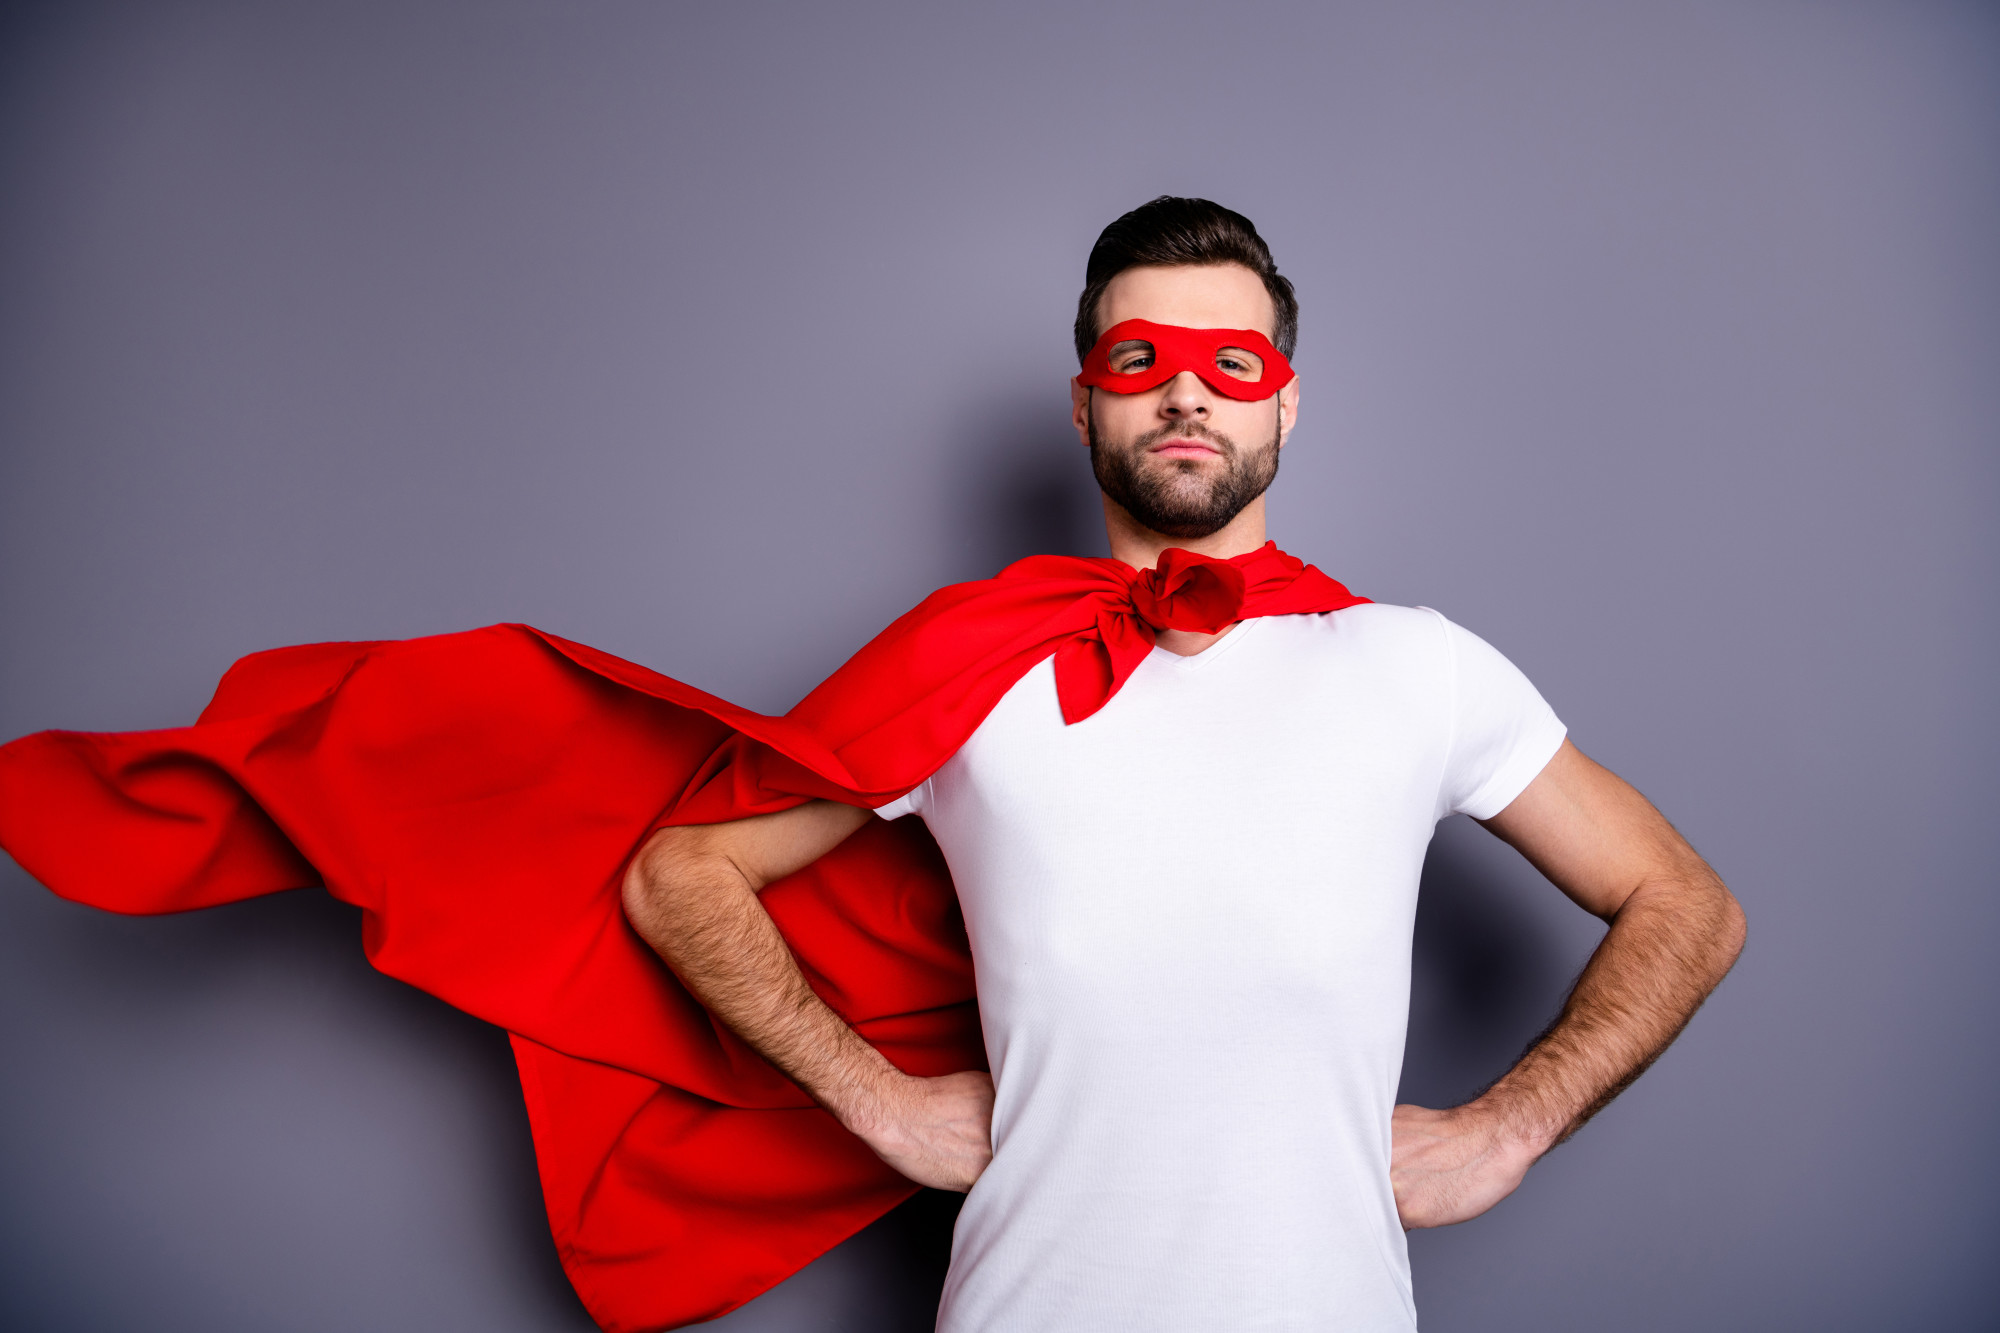 The Complete Guide to Planning a Superhero Party for Beginners